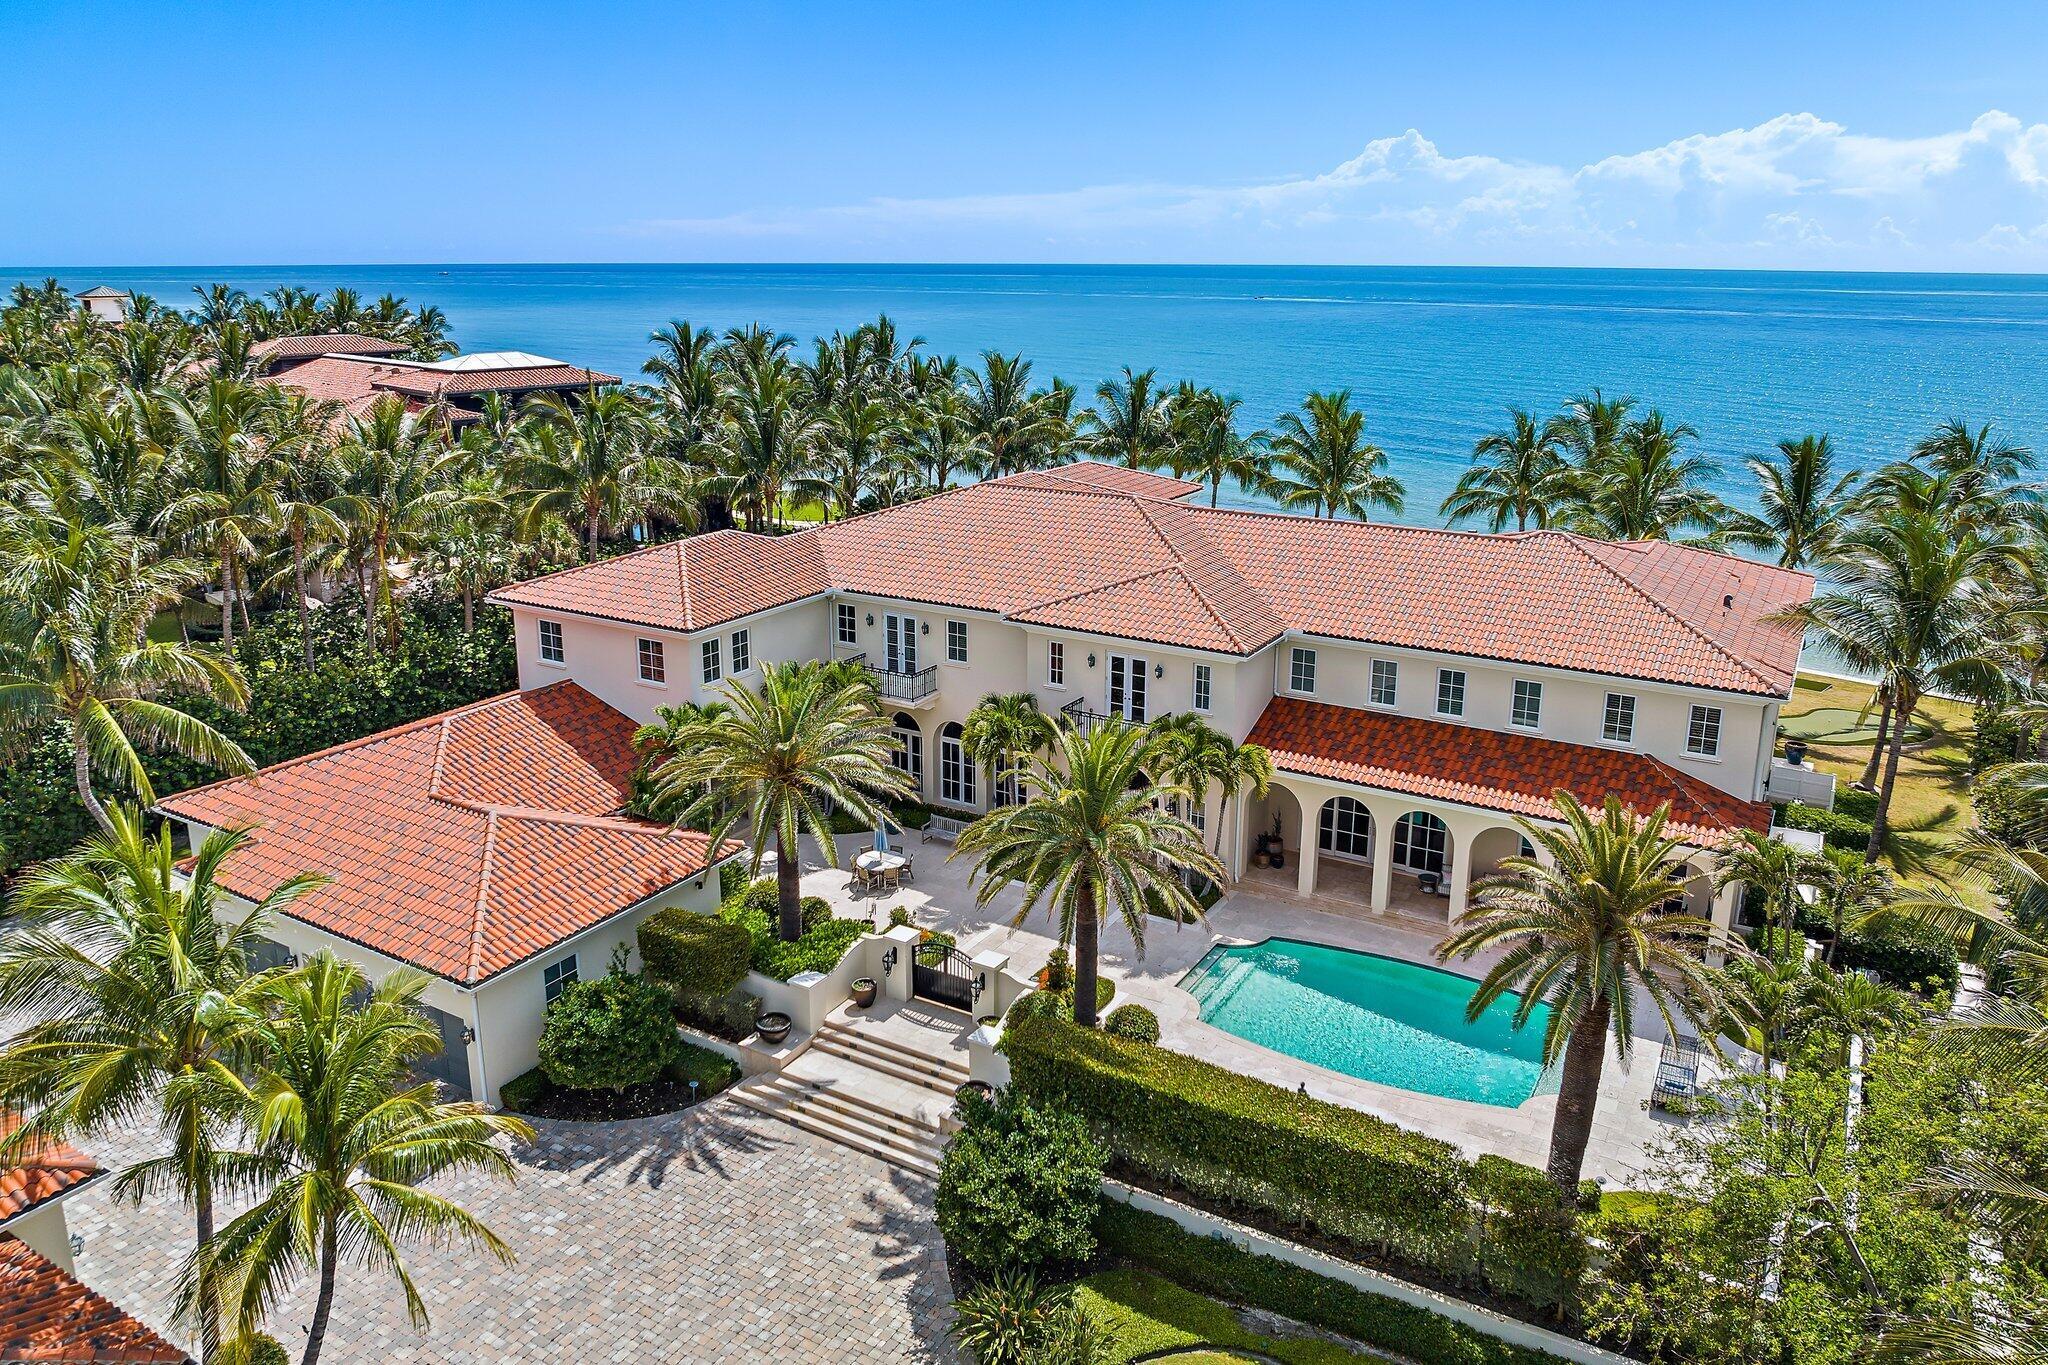 ''Villa Oceano Azul'' -1400 S Ocean Blvd. Manalapan, Florida.  This magnificent estate residence is situated between the Atlantic Ocean and the Intracoastal Waterway in the exclusive estate section of Manalapan.  As its name implies, this extraordinary property totals nearly 2 acres with over 200 feet of direct oceanfront and an accompanying 200 feet on the Intracoastal Waterway equipped with a full-service concrete dock. Offered fully furnished and turnkey with transitional coastal inspired interiors by Marc-Michaels Interior Design, this stunning European-inspired Villa creates graciously proportioned rooms in a grand total of 20,712 square feet with seven bedrooms, nine full and four half baths, including a guest​​‌​​​​‌​​‌‌​‌‌‌​​‌‌​‌‌‌​​‌‌​‌‌‌ house.